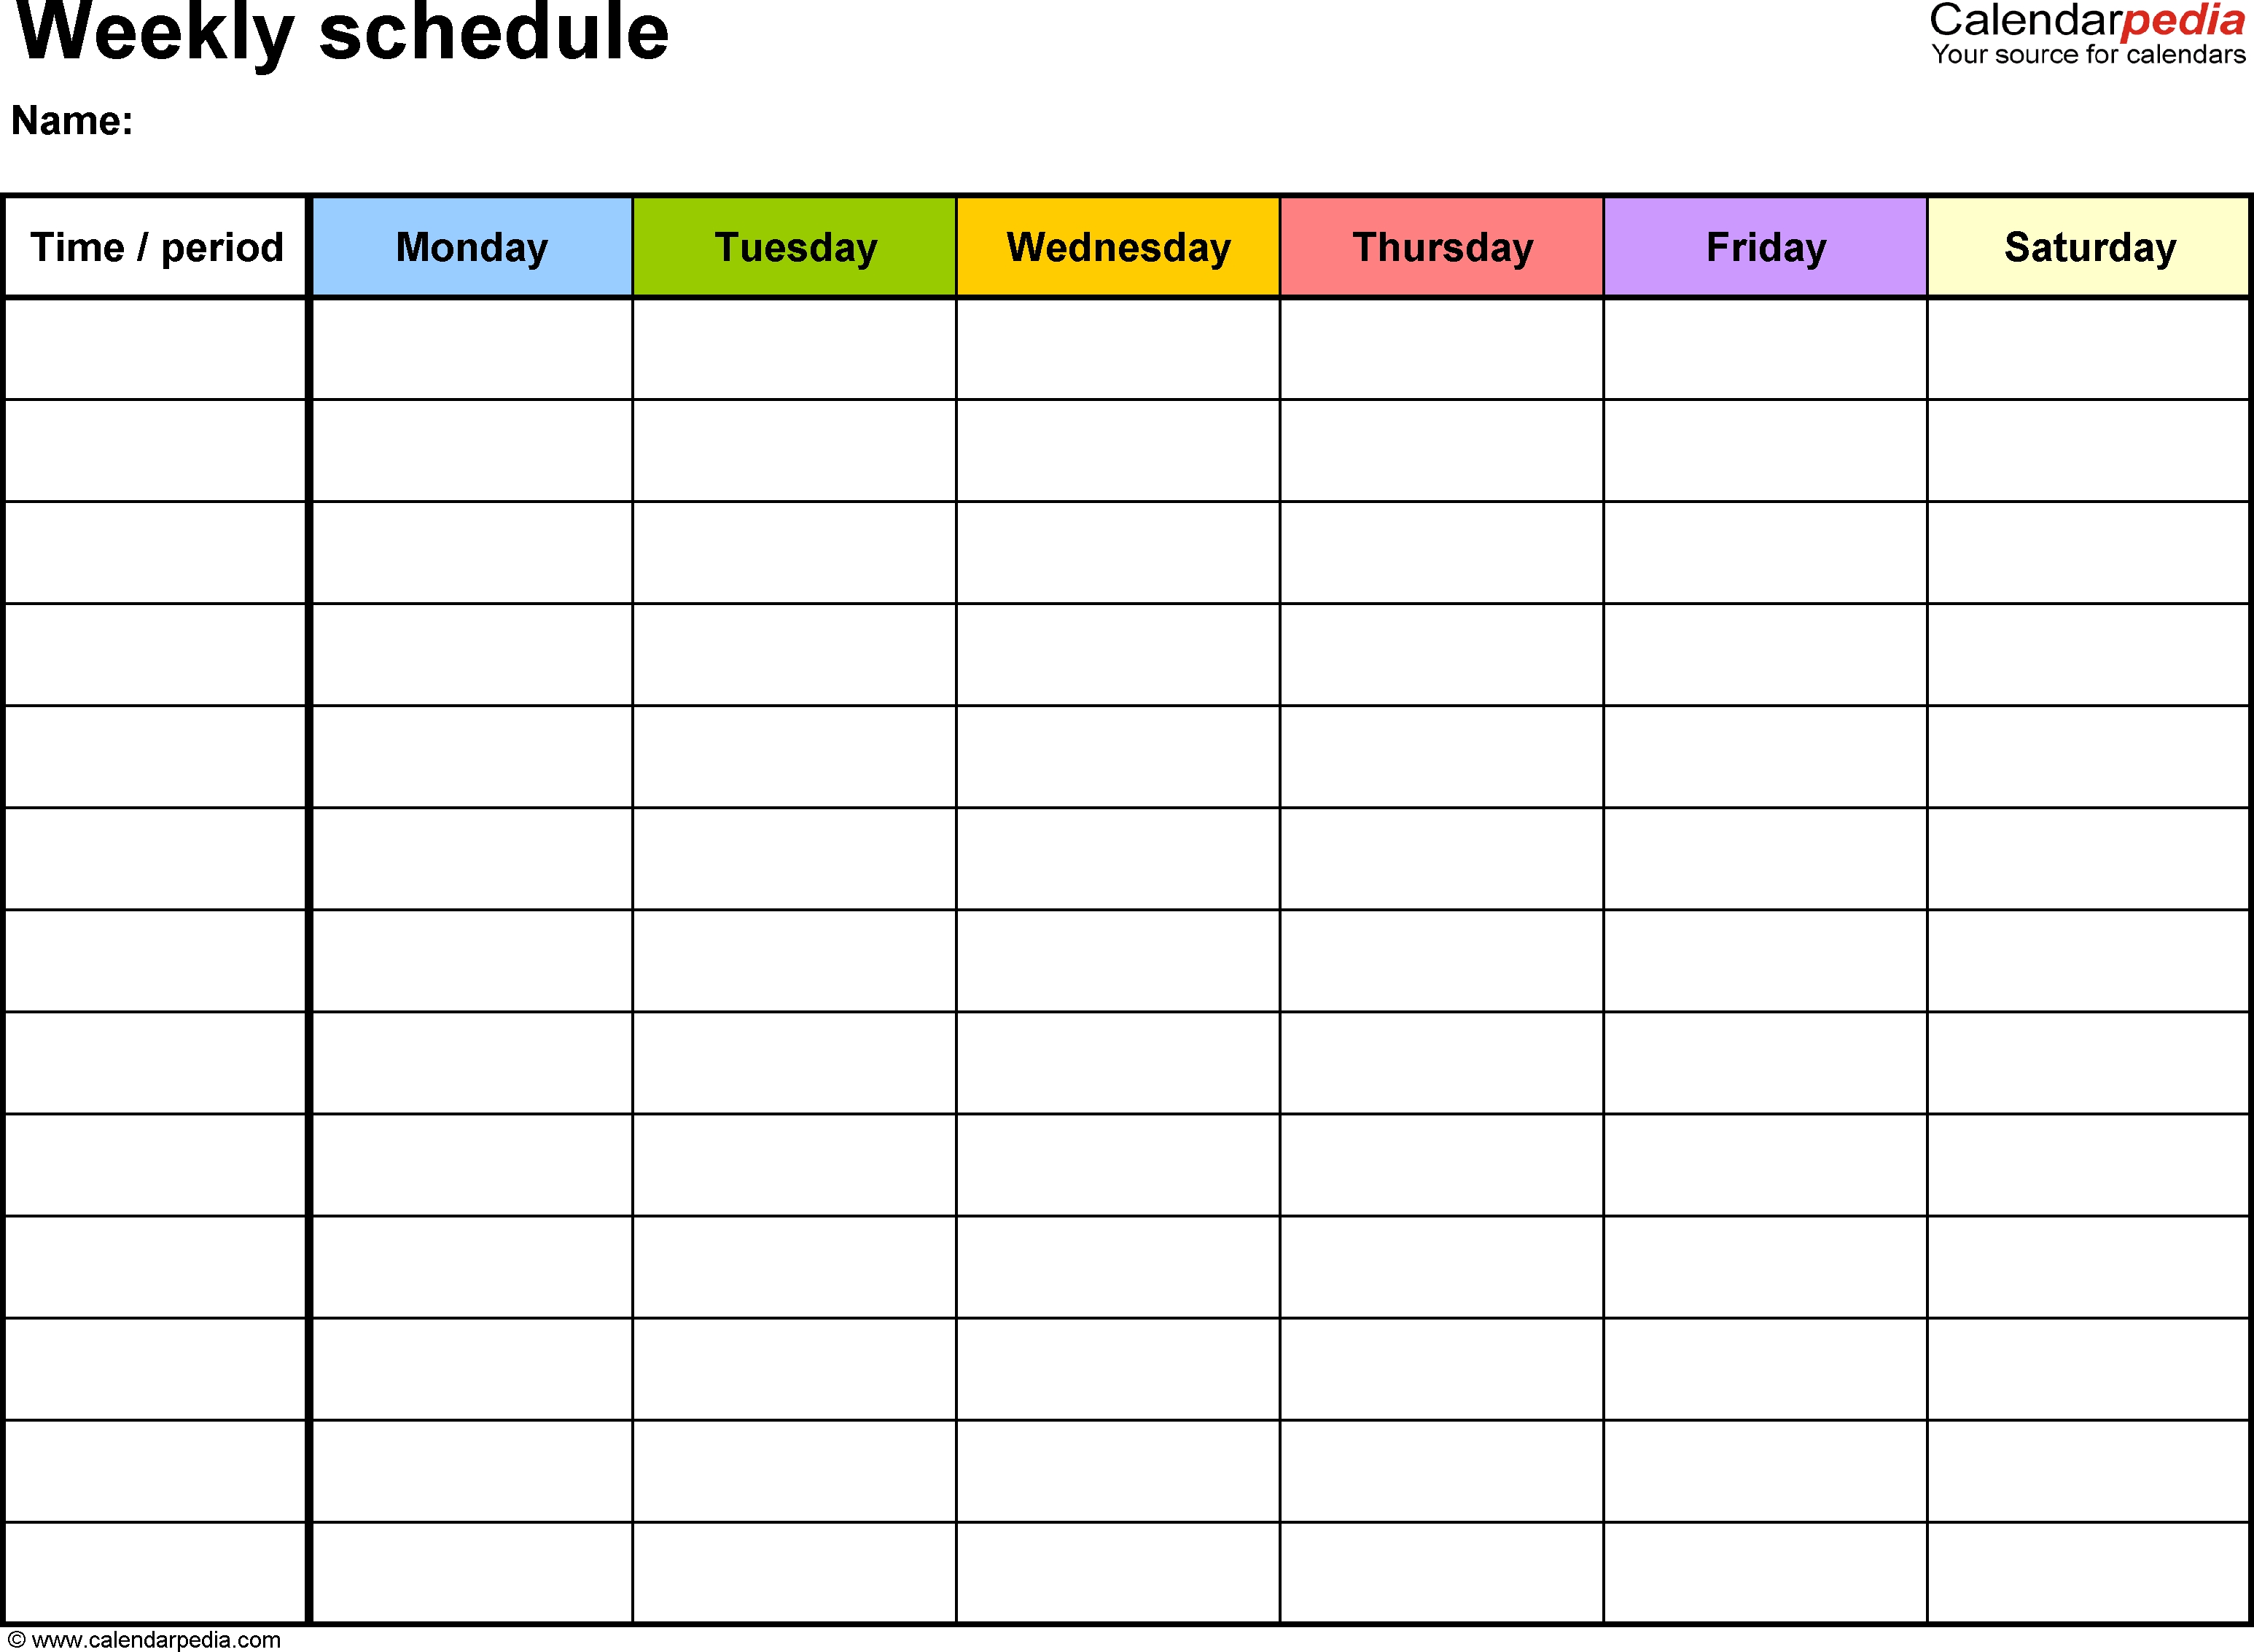 Free Weekly Schedule Templates For Word - 18 Templates-Monday Wednesday Friday Schedule Template